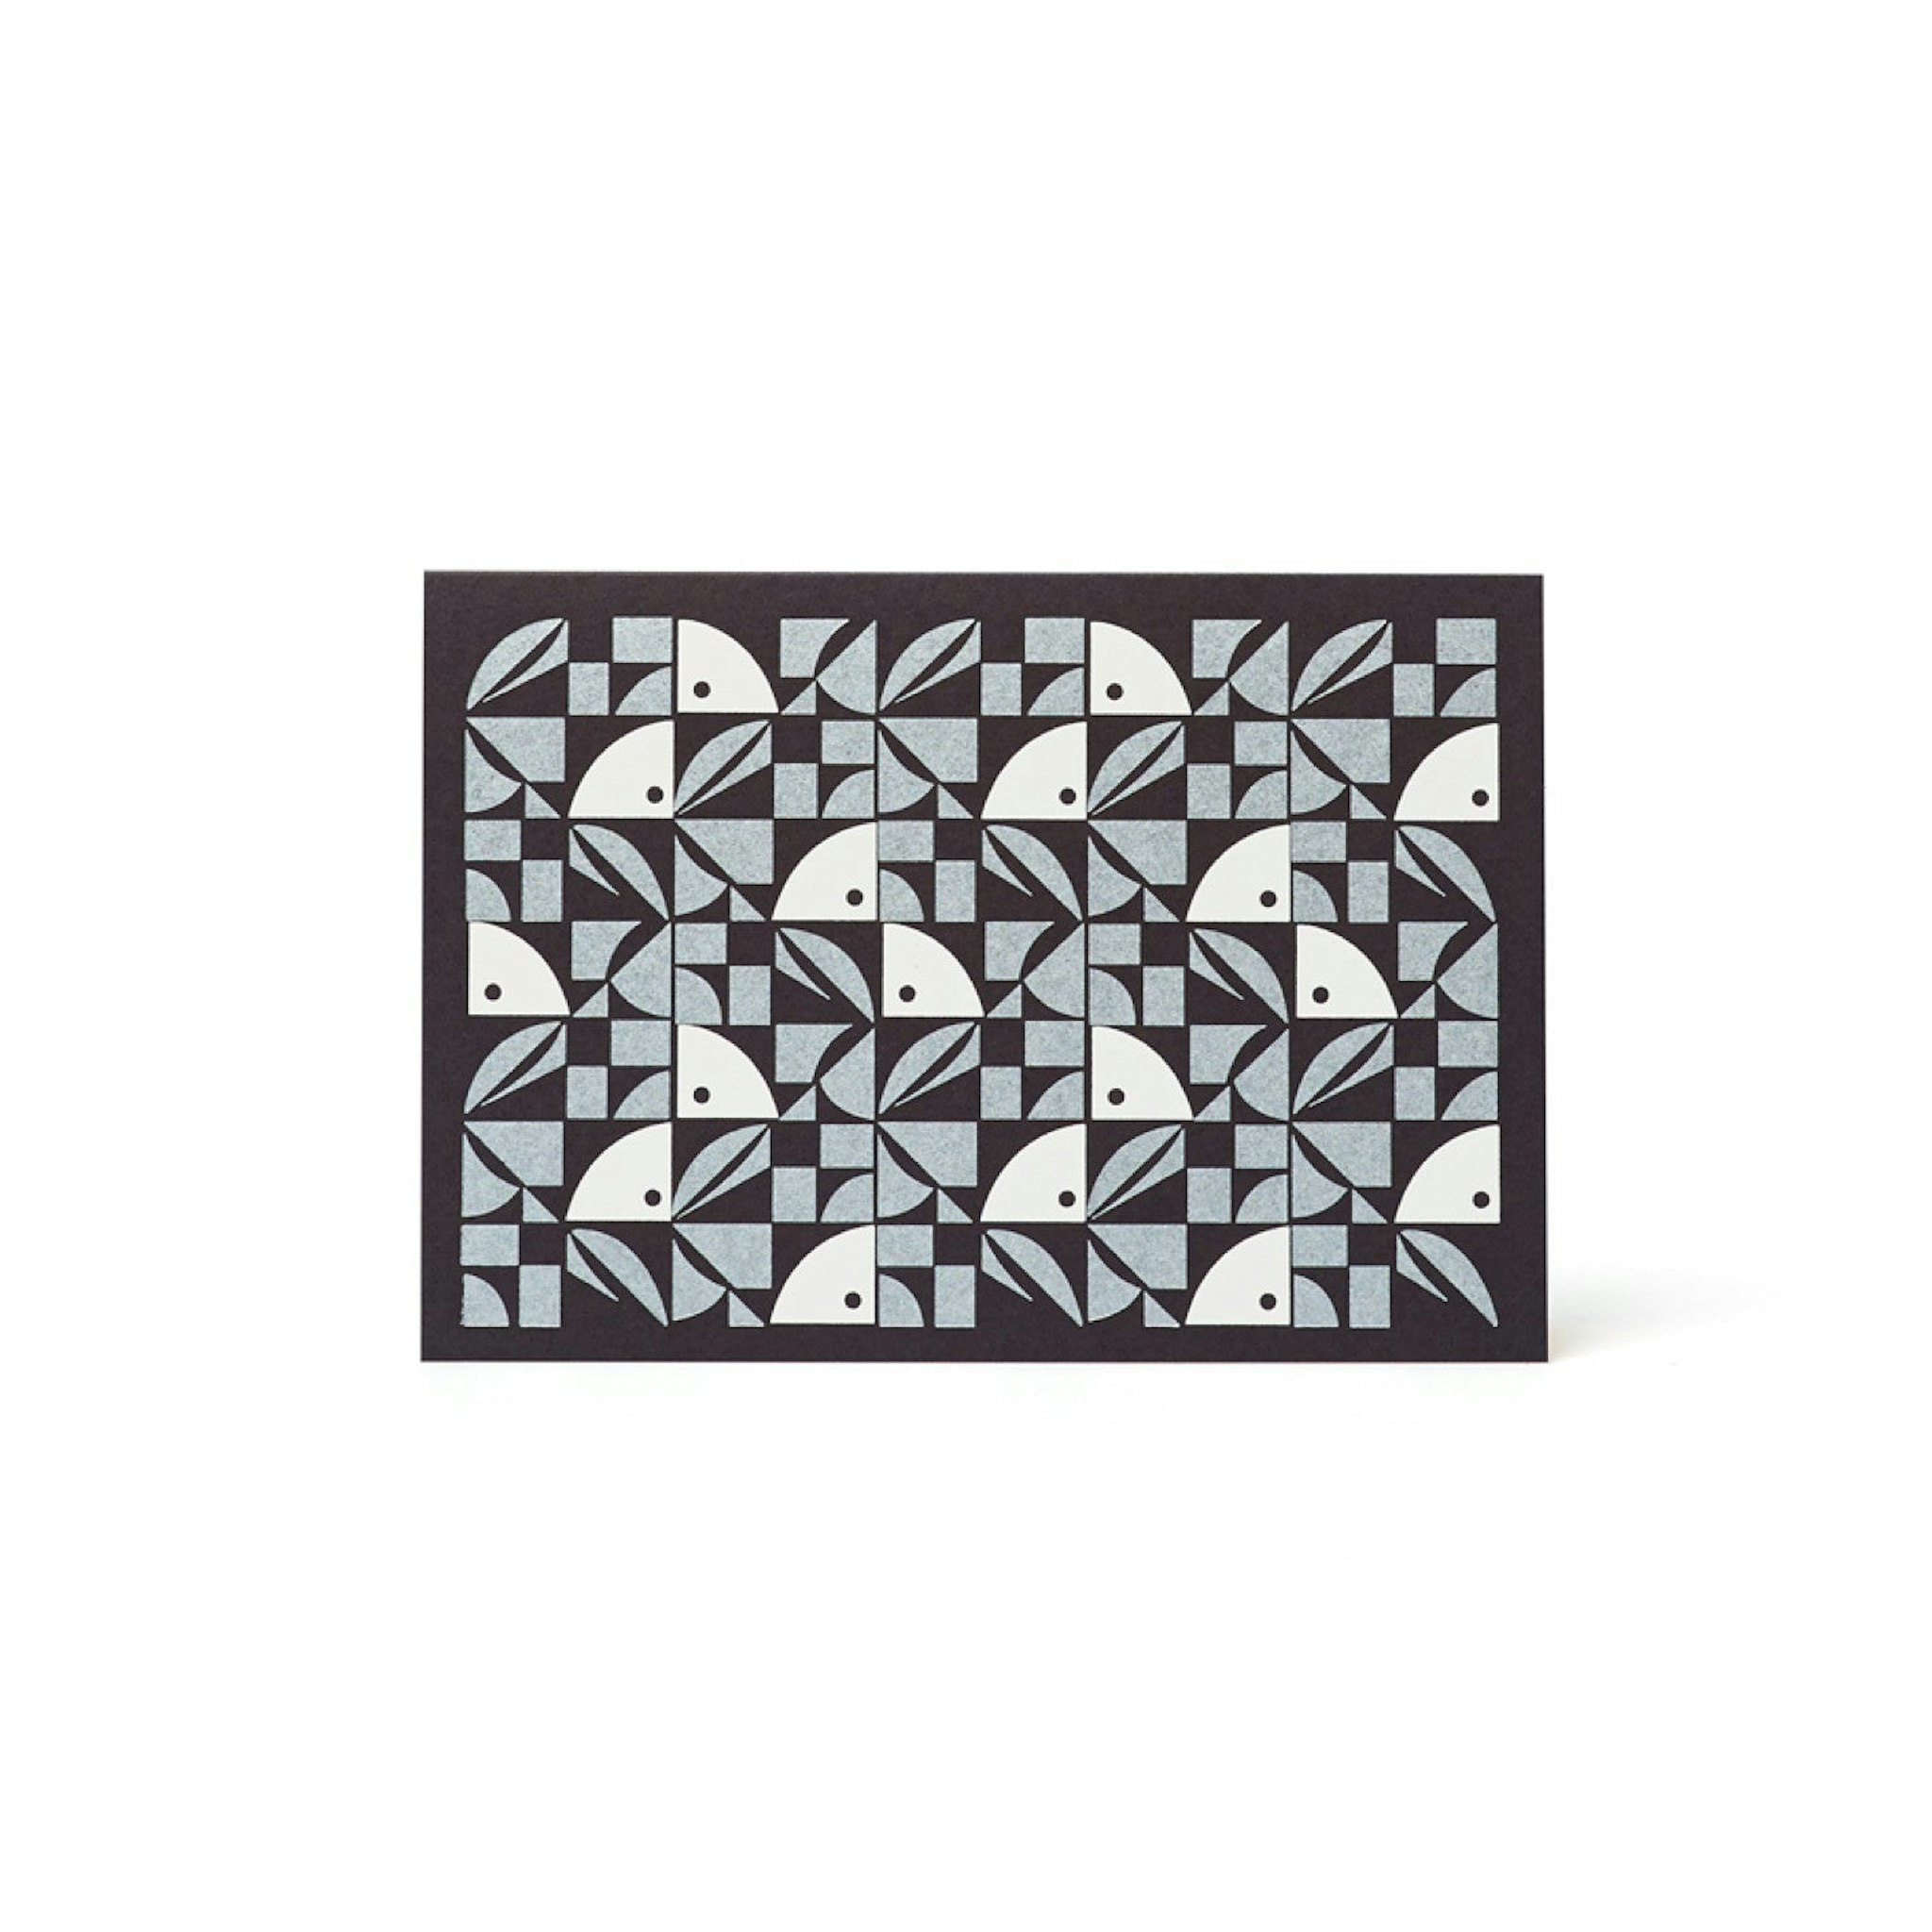 Bloom Letterpress Card - Navy and Silver by Esme Winter